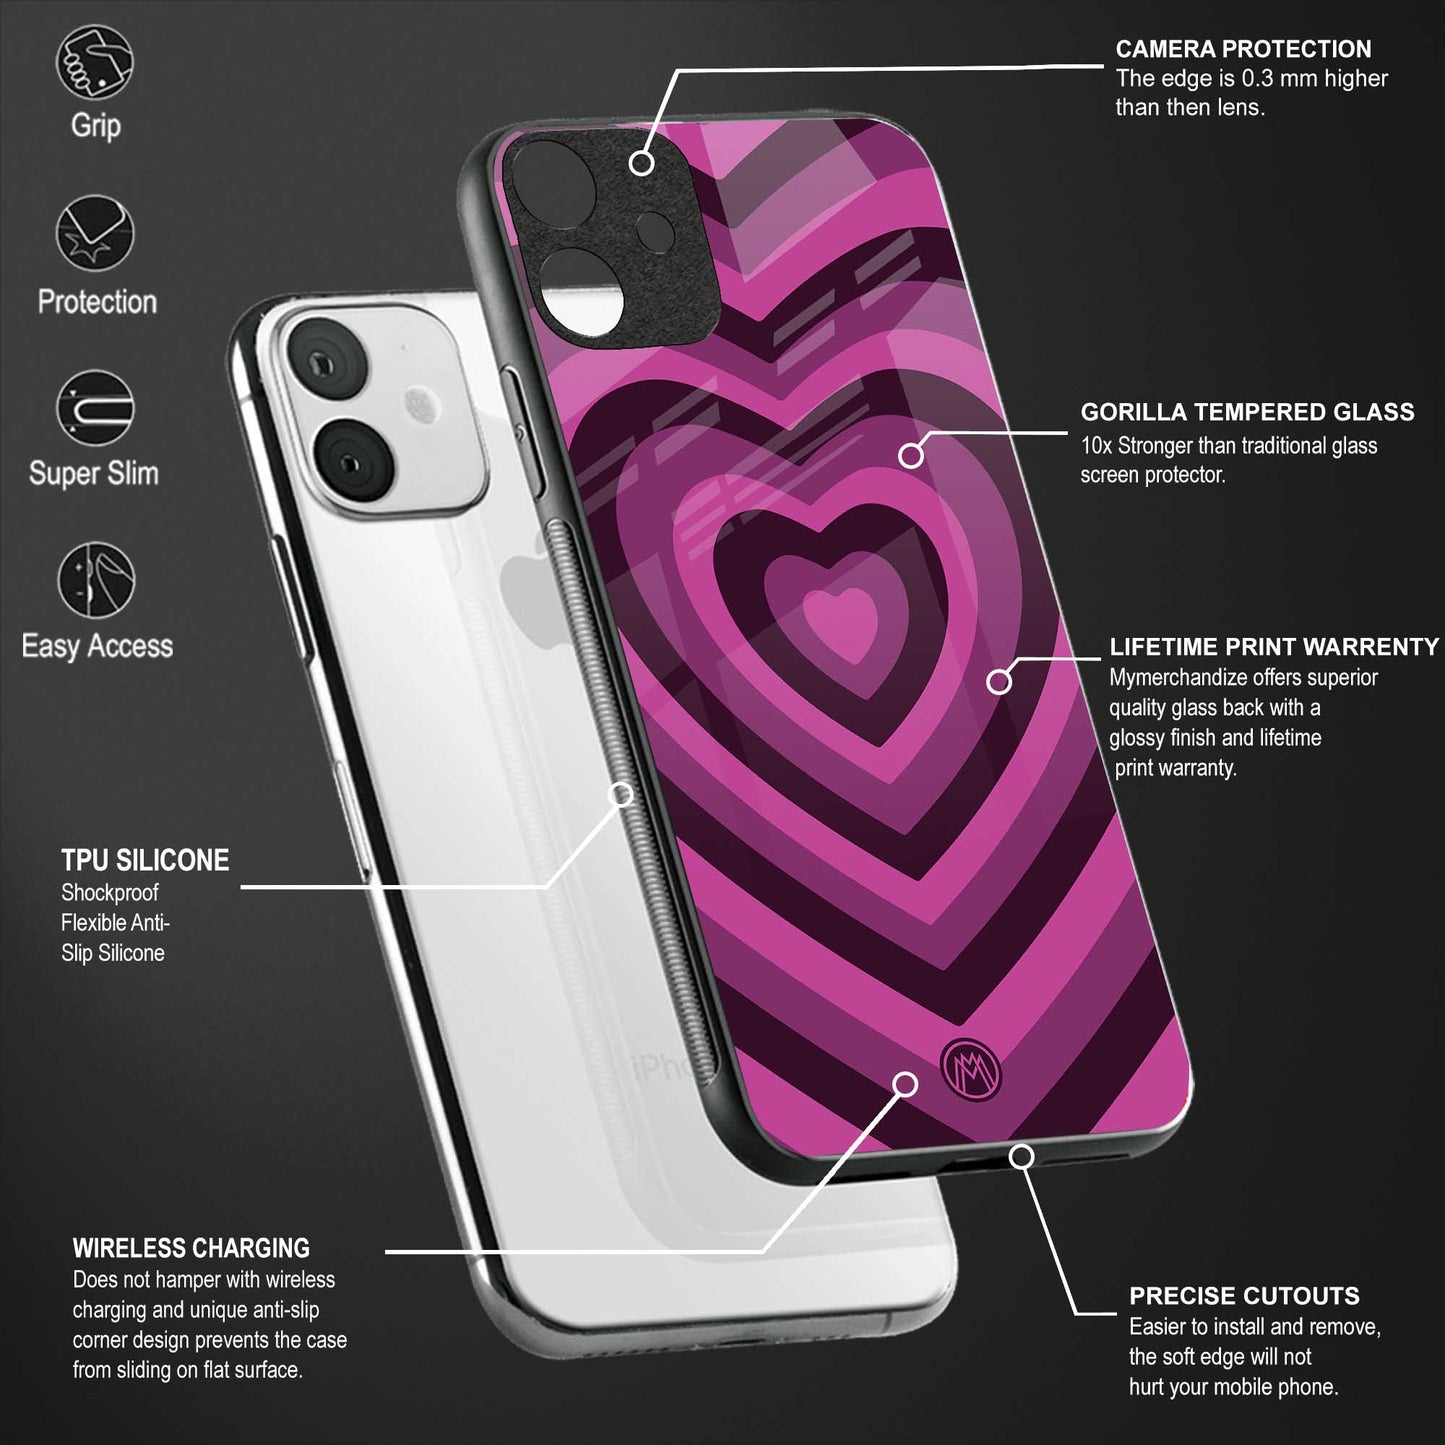 y2k burgundy hearts aesthetic back phone cover | glass case for google pixel 4a 4g